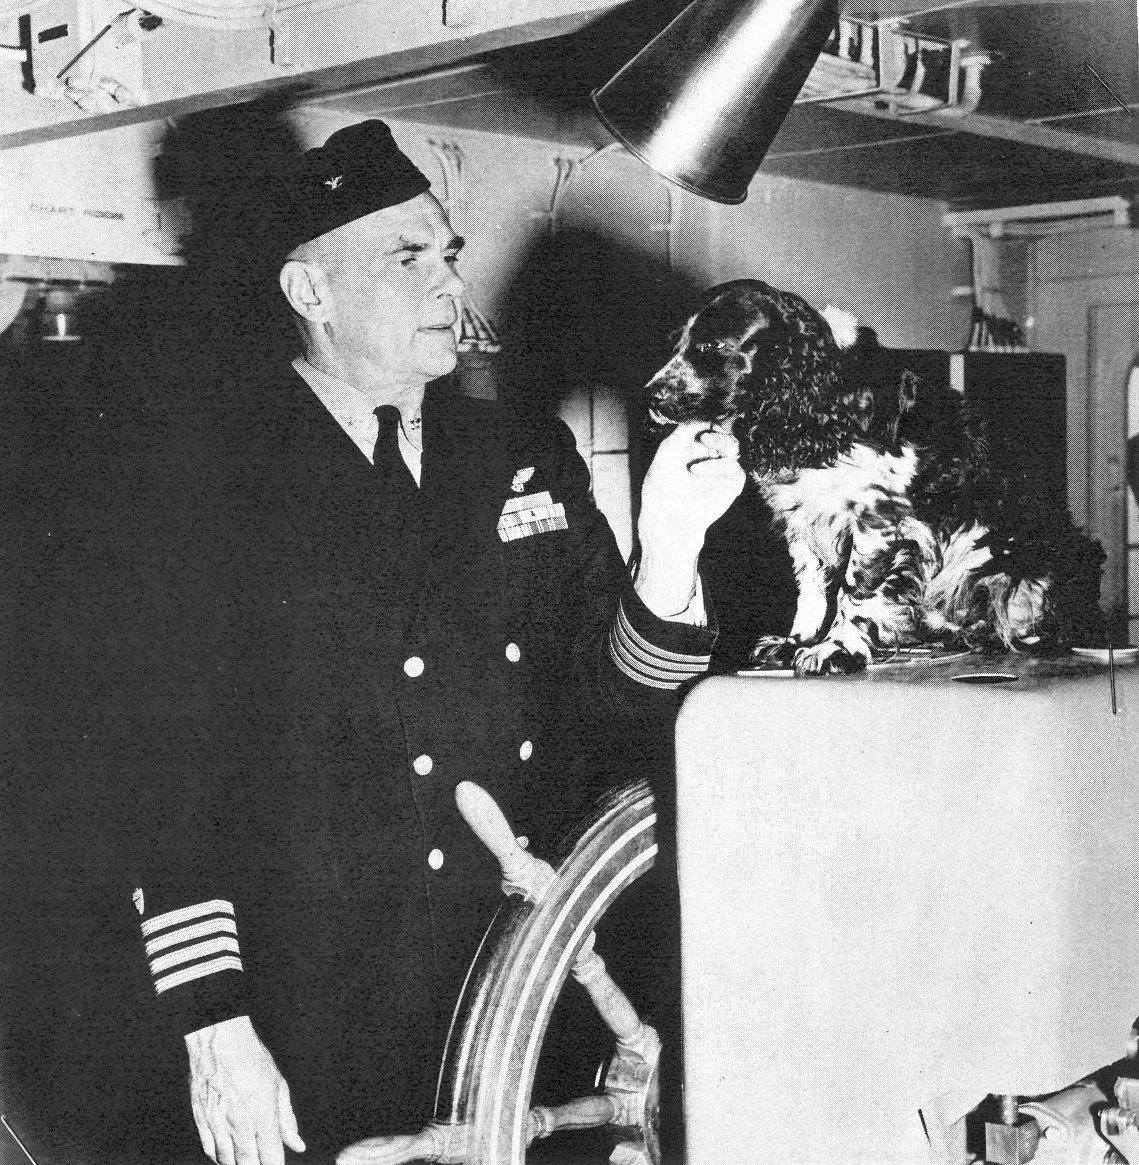 Capt. Carl Christian von Paulsen and one of his pet canines. This photo shows von Paulsen on the bridge of an attack transport with cocker spaniel “Eight Ball.” von Paulsen’s previous pet, a white bulldog named “Boy-o-boy,” had been a particular favorite with the Inuit people of Greenland. (U.S. Coast Guard)